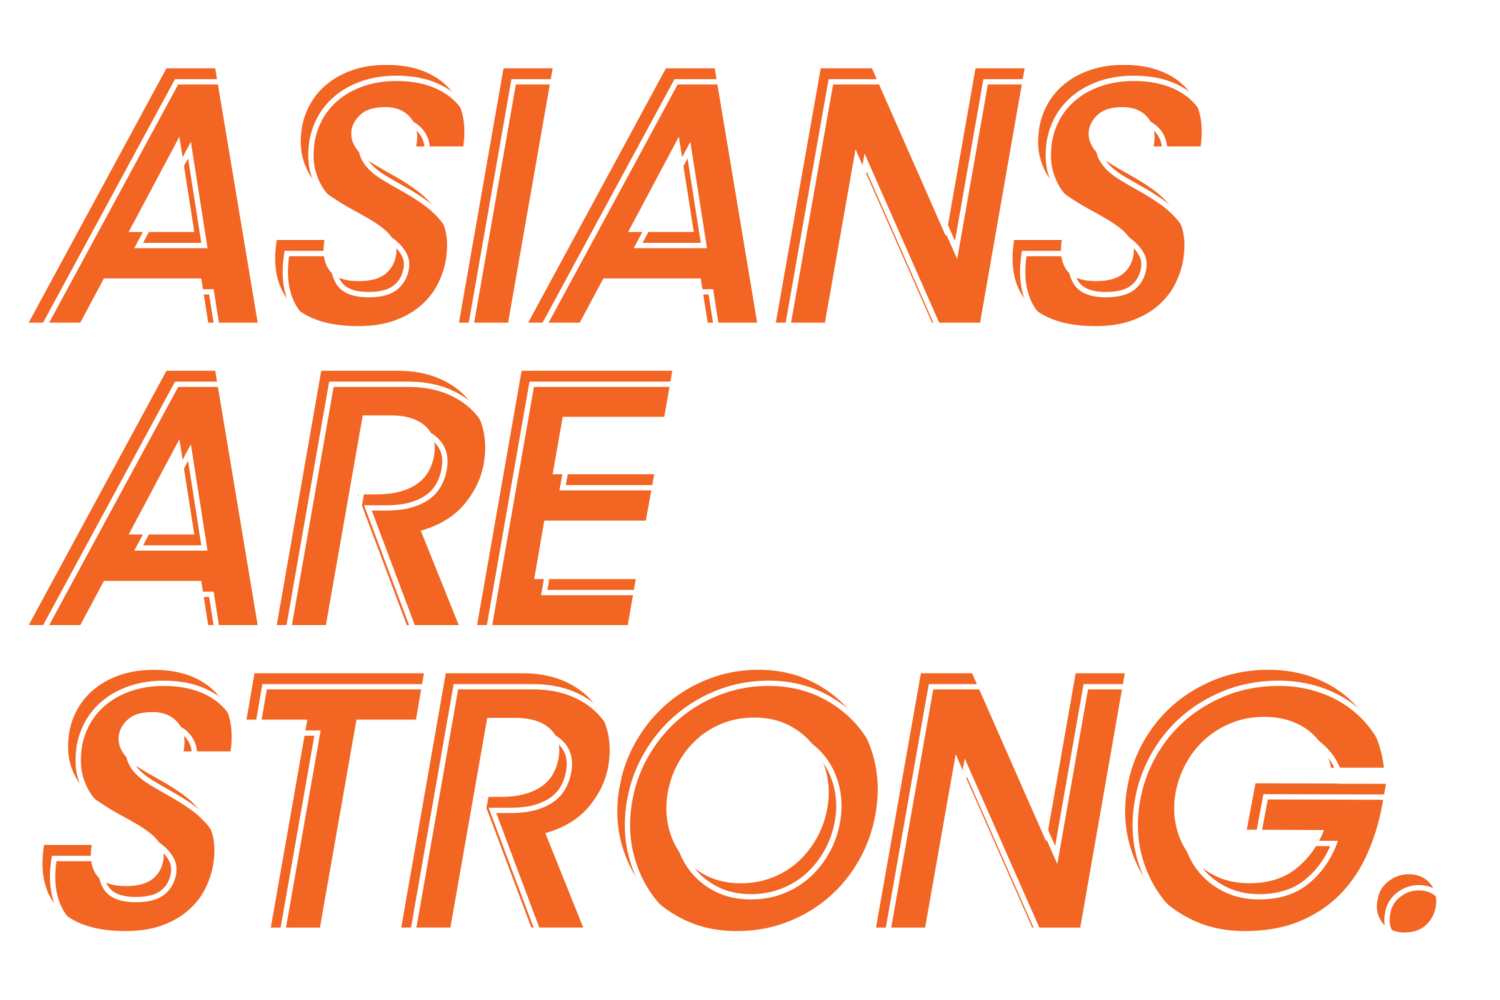 Asians Are Strong